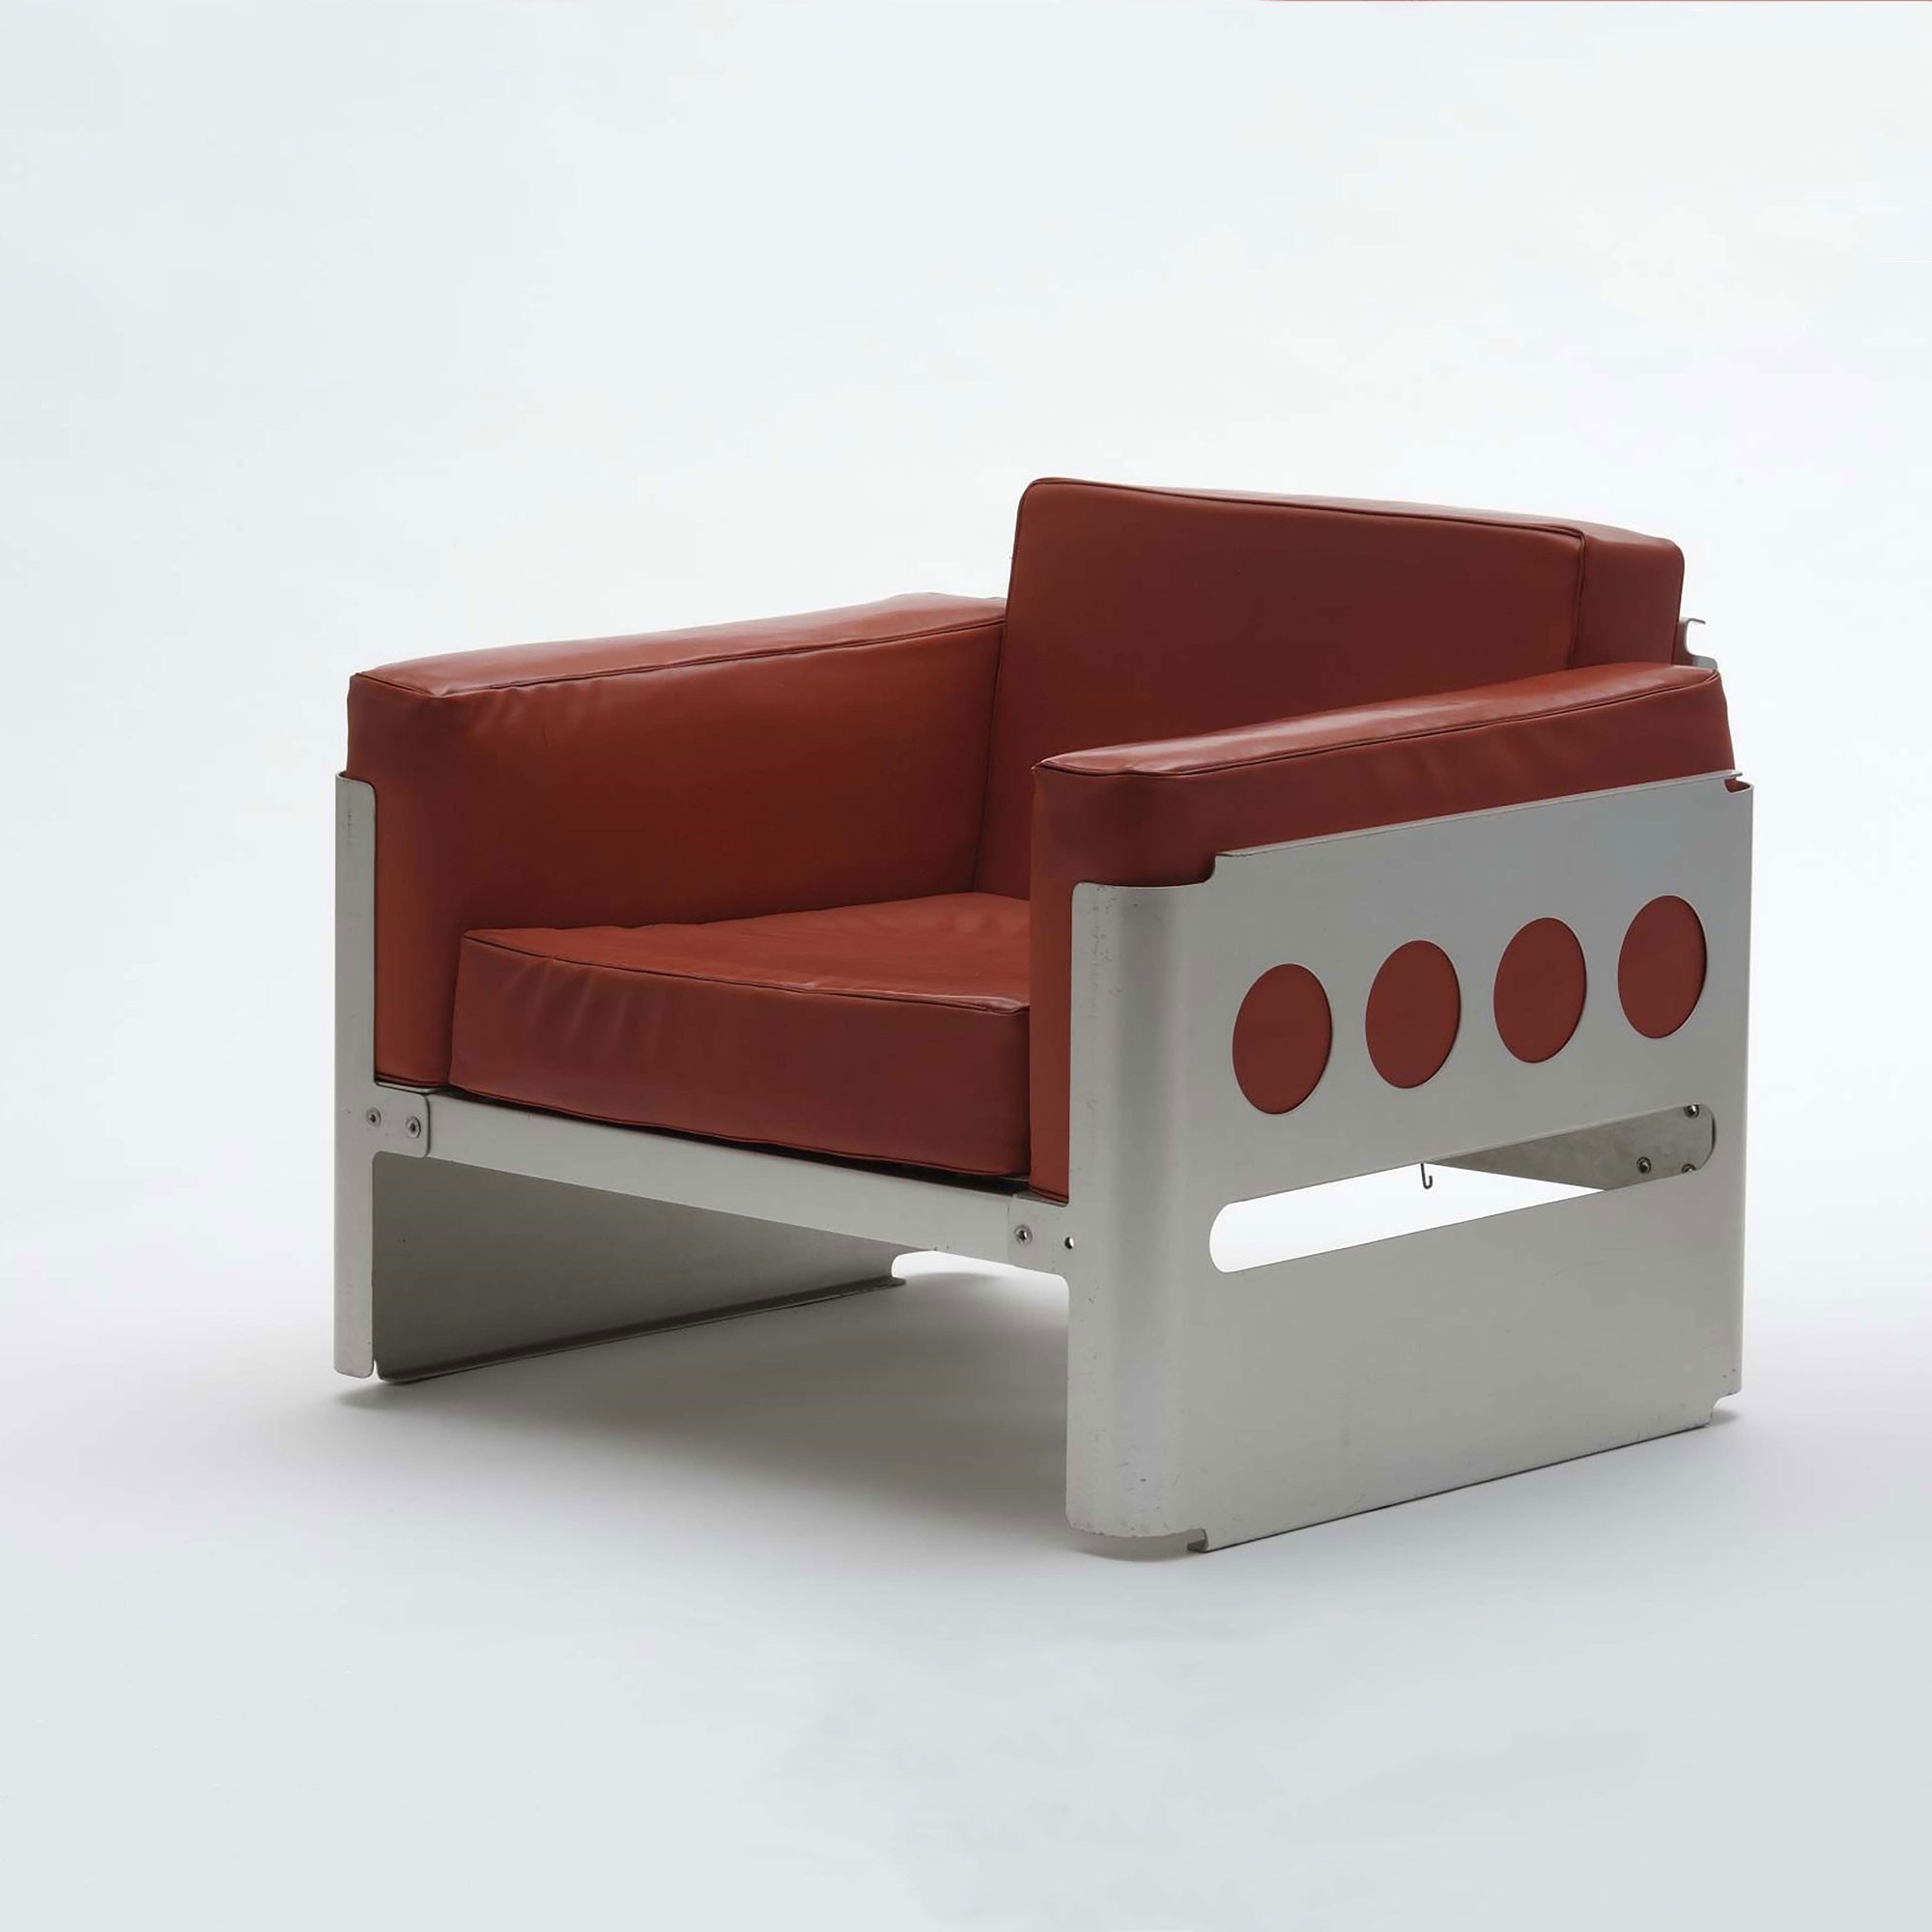 <BODY>Walter Pichler, Fauteuil<em> Galaxy</em>, Vienna, 1966<br />Aluminum, riveted; foam padding with red textile cover<br />© MAK/Georg Mayer</BODY>